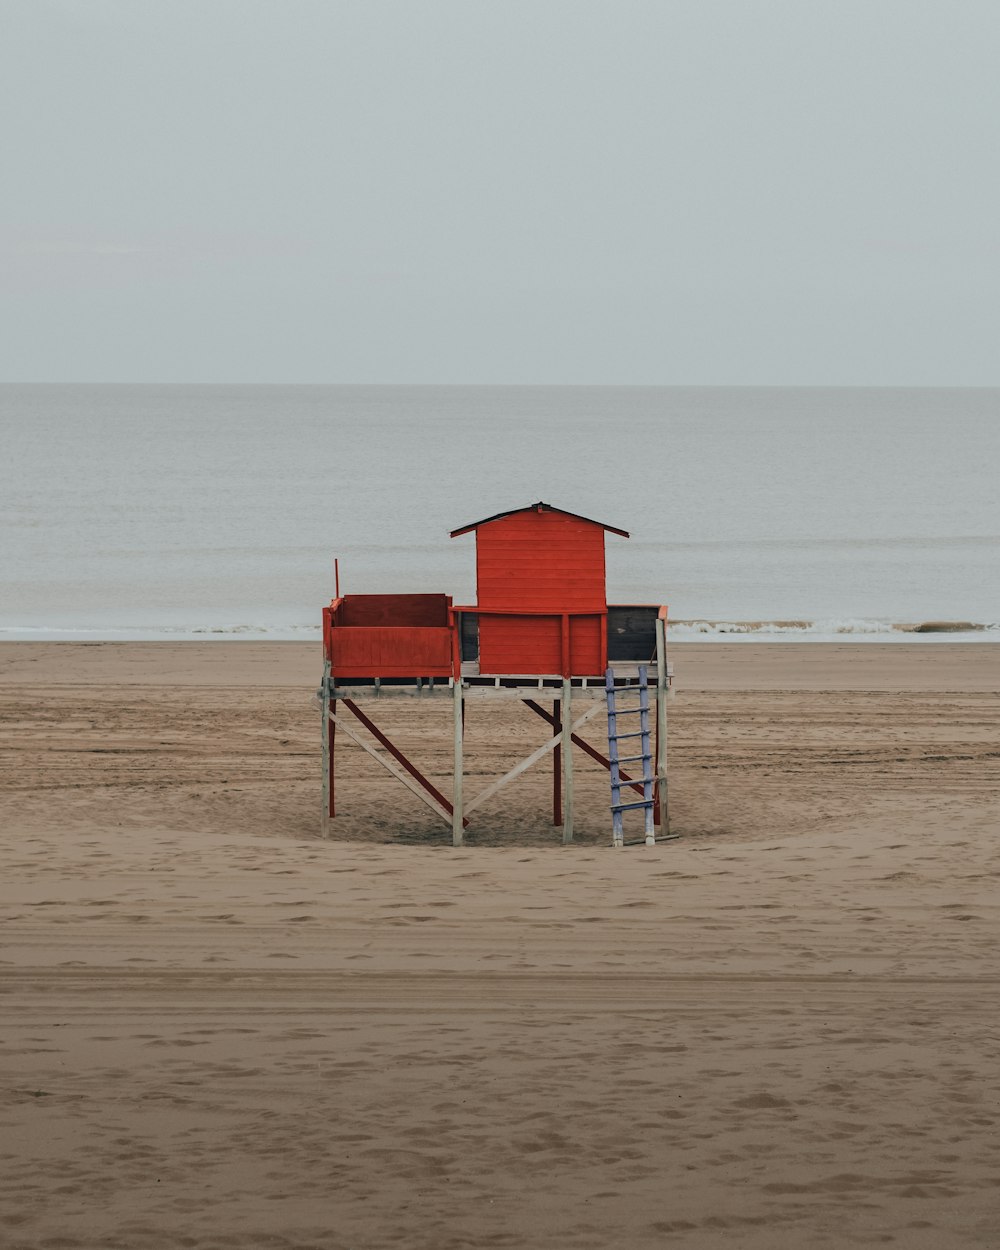 red wooden shed on beach shore during daytime